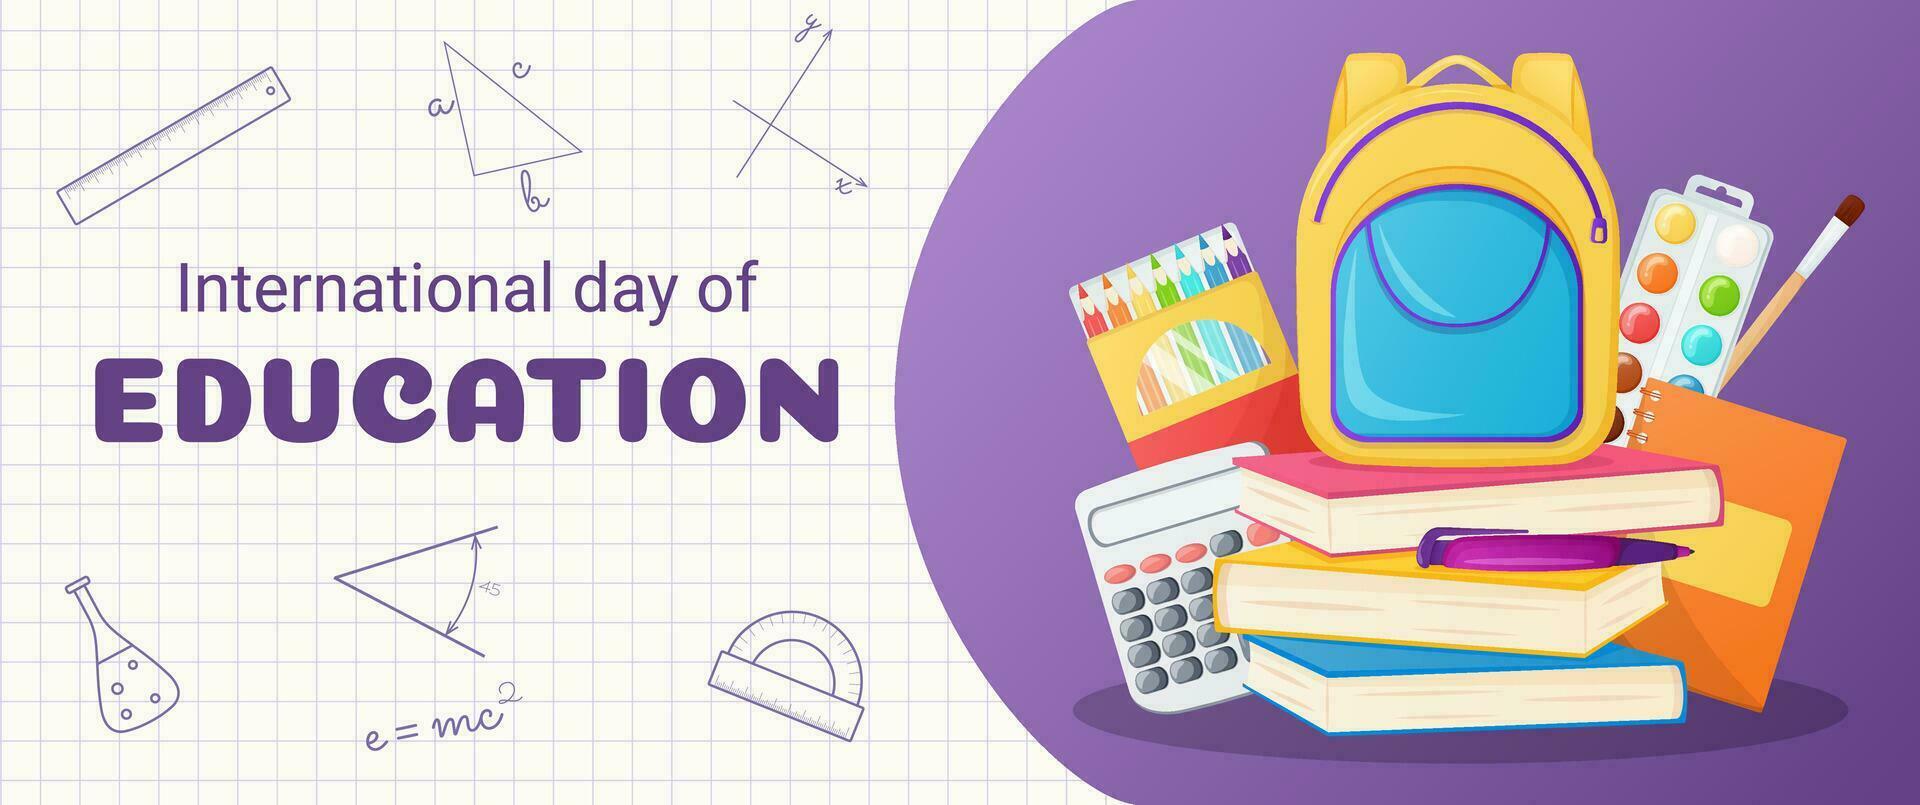 International day of education banner with school supplies. vector